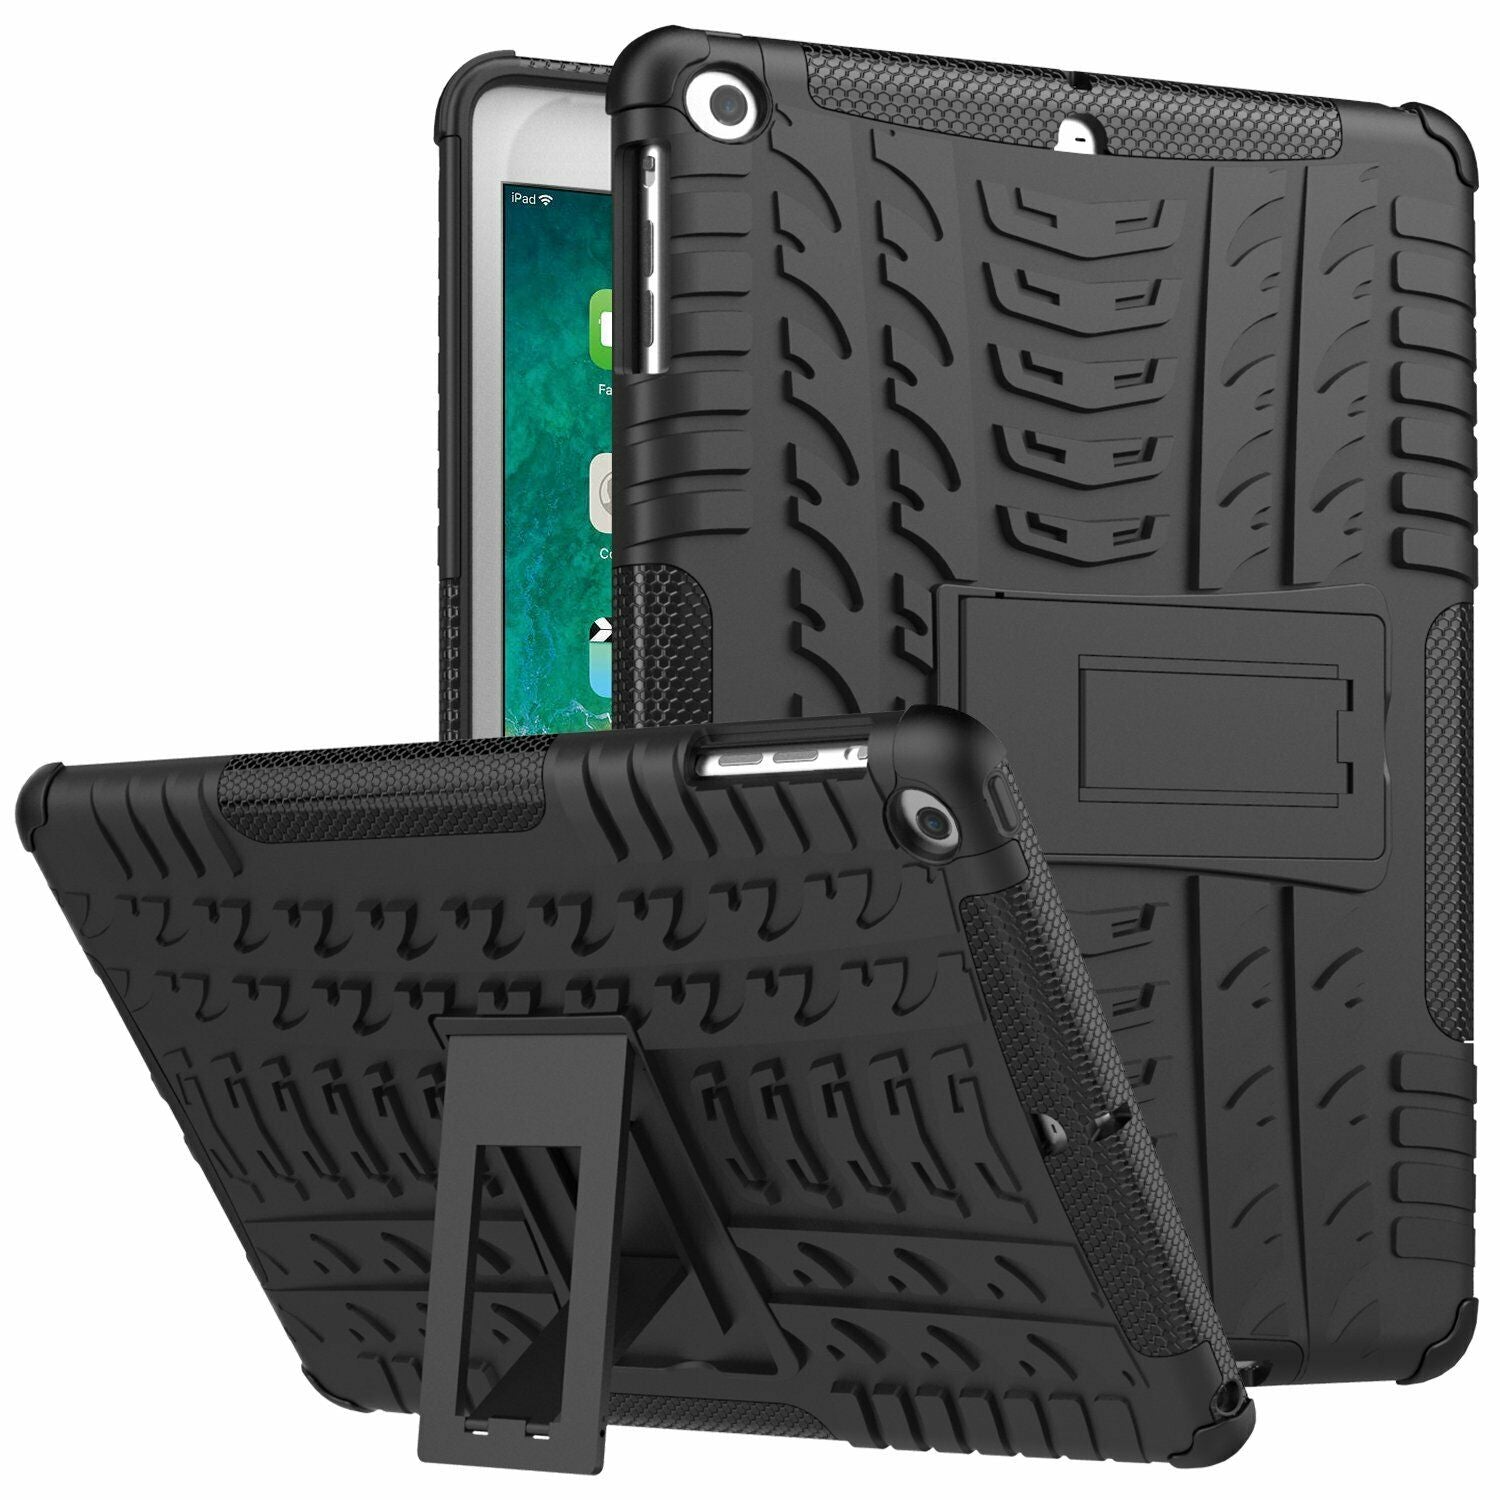 Shock proof Heavy Duty Case Cover For iPad Air 1